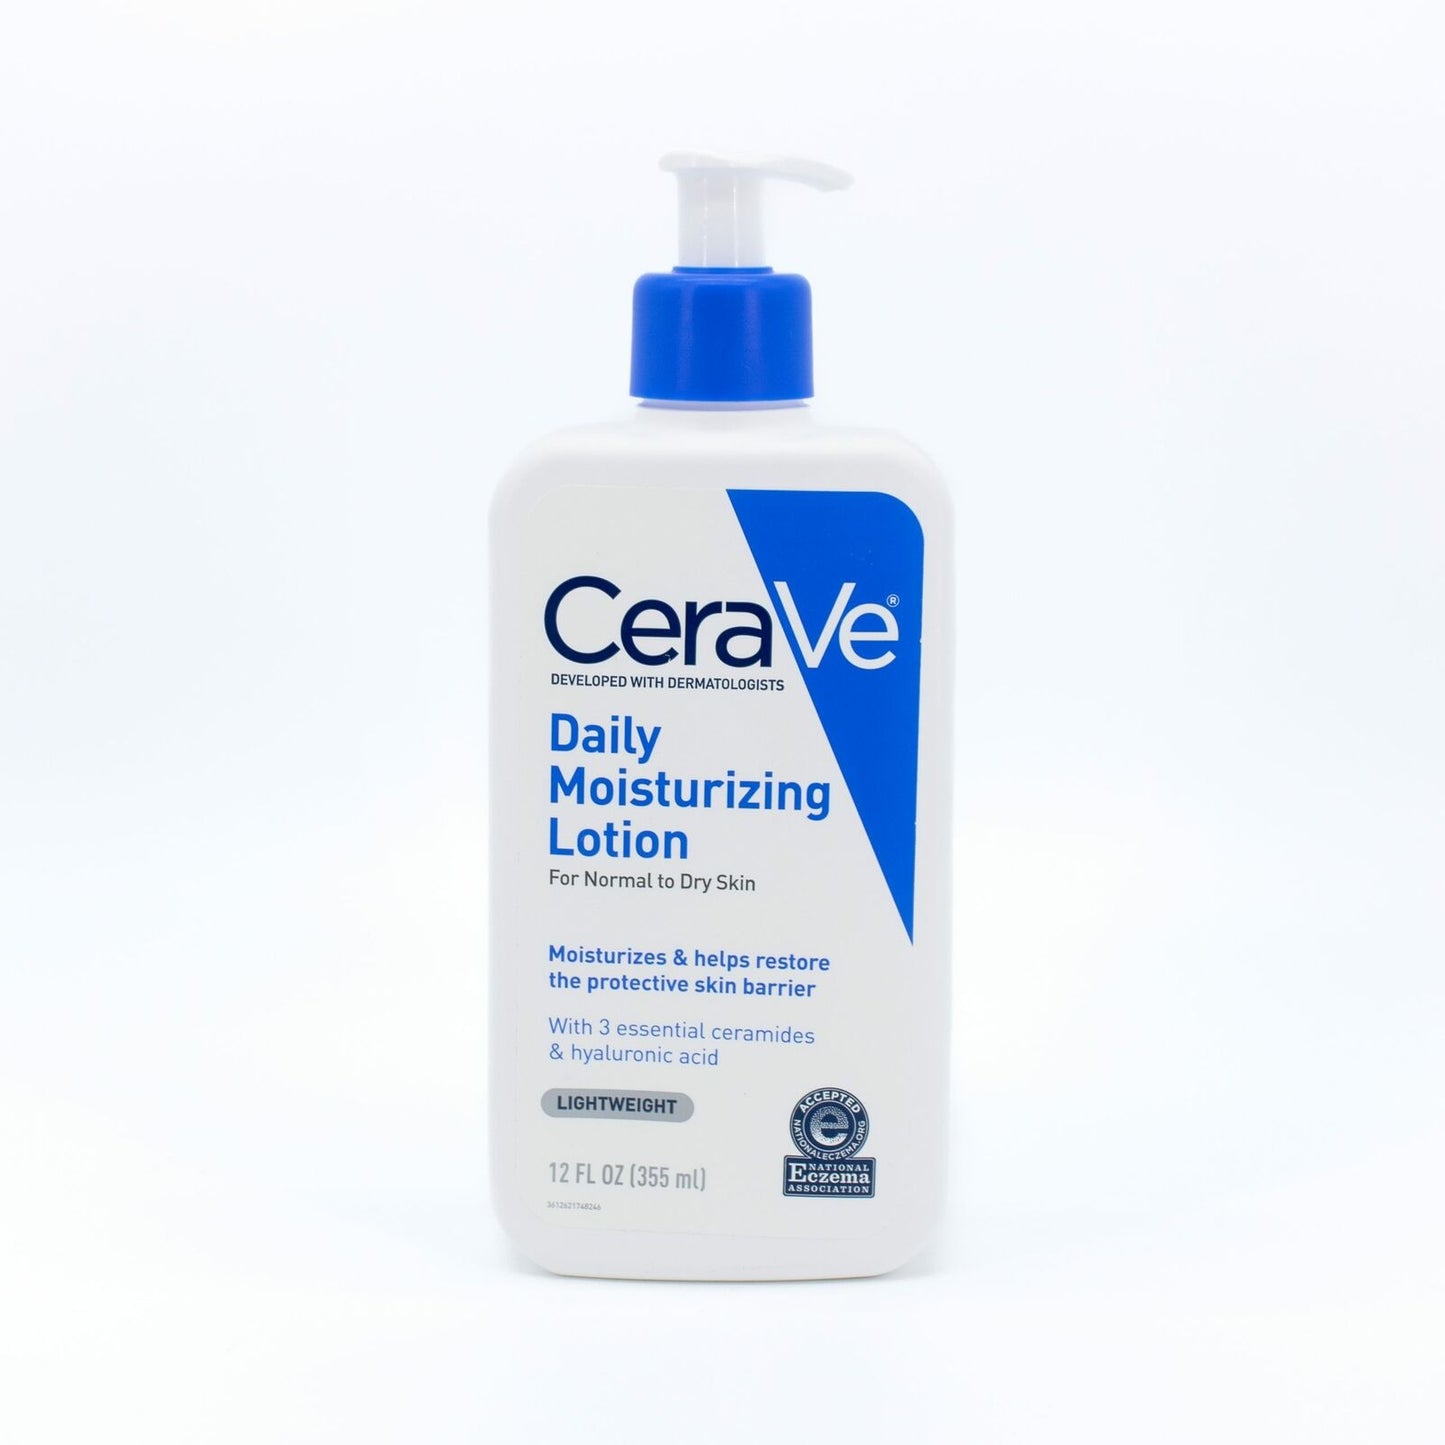 CeraVe Daily Moisturizing Lotion for Normal to Dry Skin 12oz - New